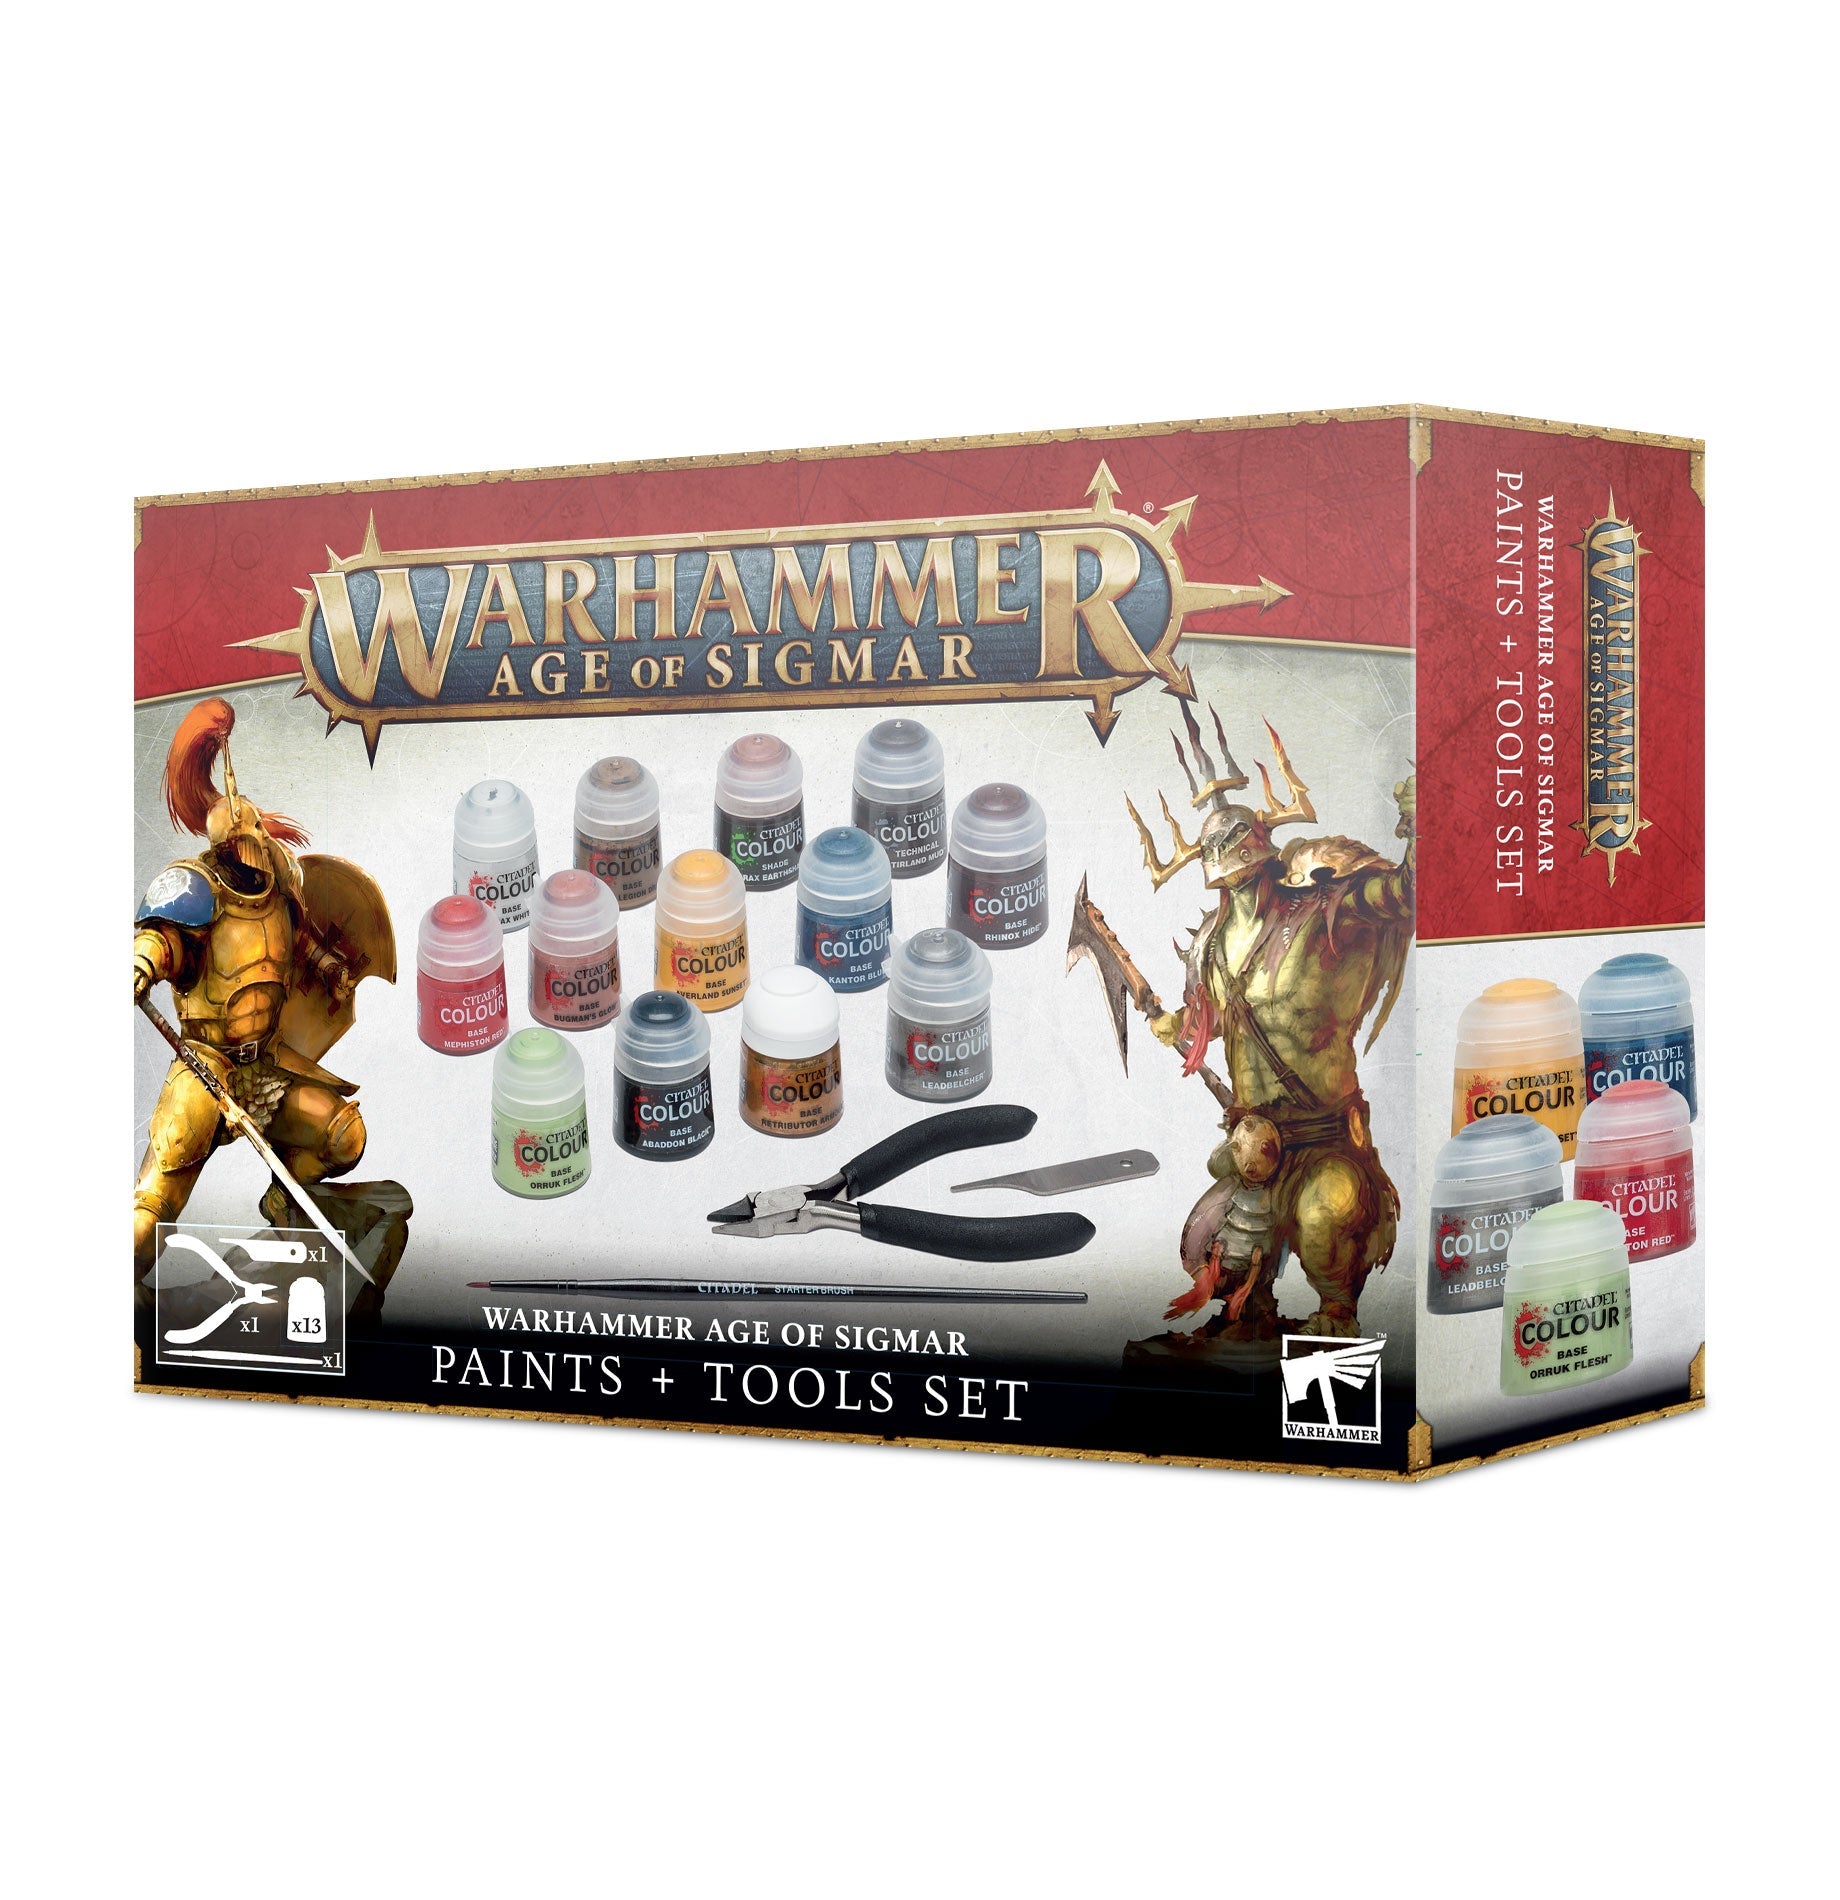 Warhammer Age of Sigmar Paint + Tools Set - Gamescape